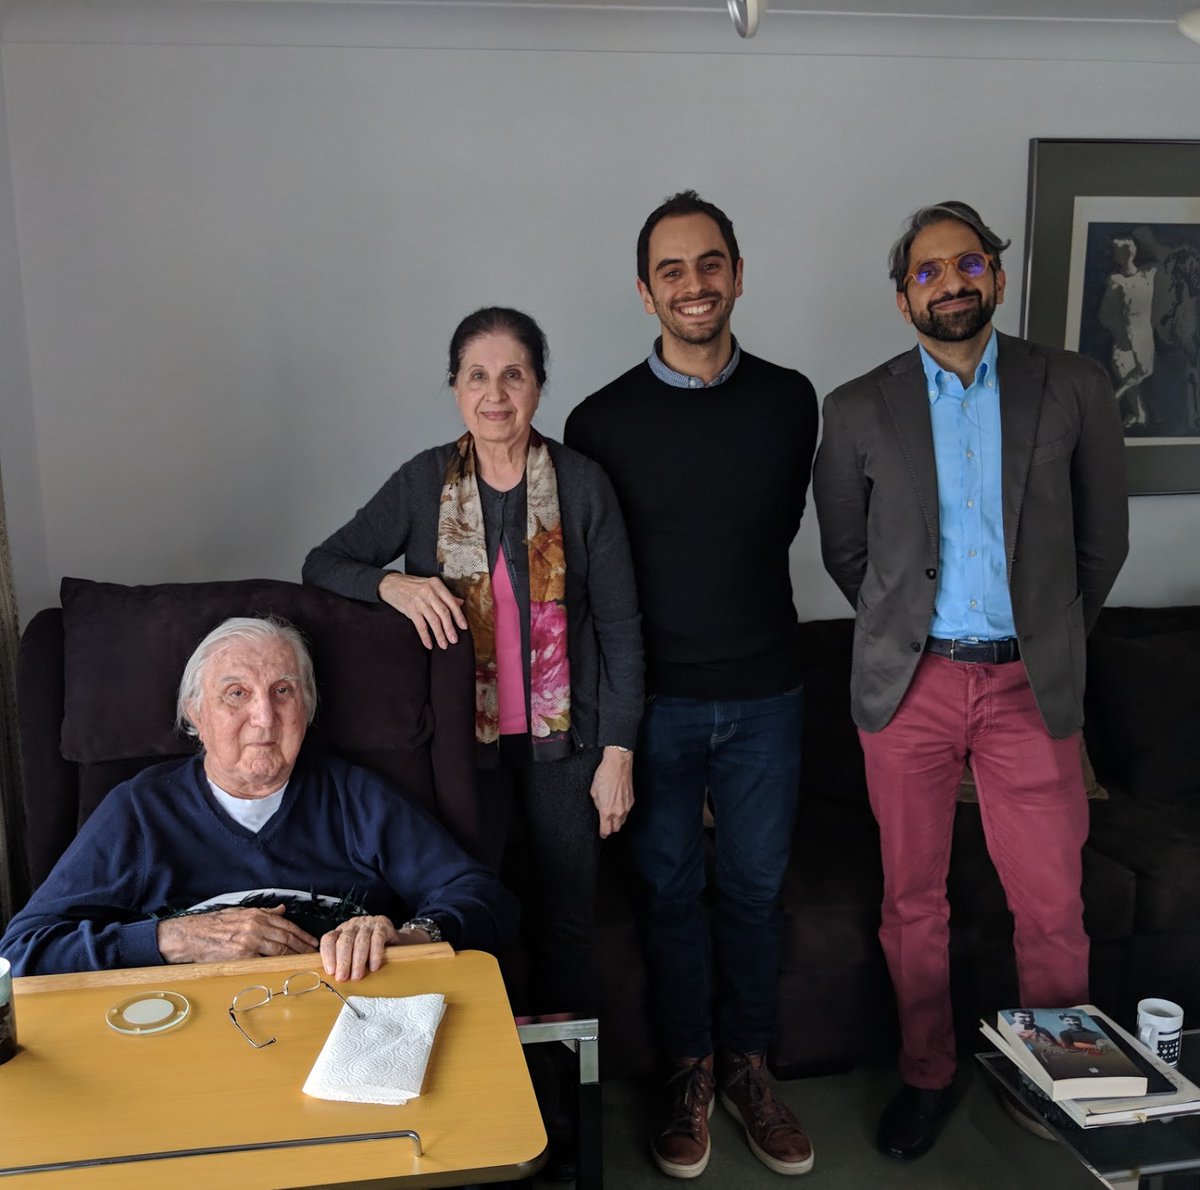 I had the great honour of visiting him in his house in England in March 2018 during my residency at the Delfina Foundation. In the photo are his wife, acclaimed author Balkis Sharara & Iraqi architect & academic Ahmed Al-Mallak, the Founding Director​ Tamayouz Excellence Award.